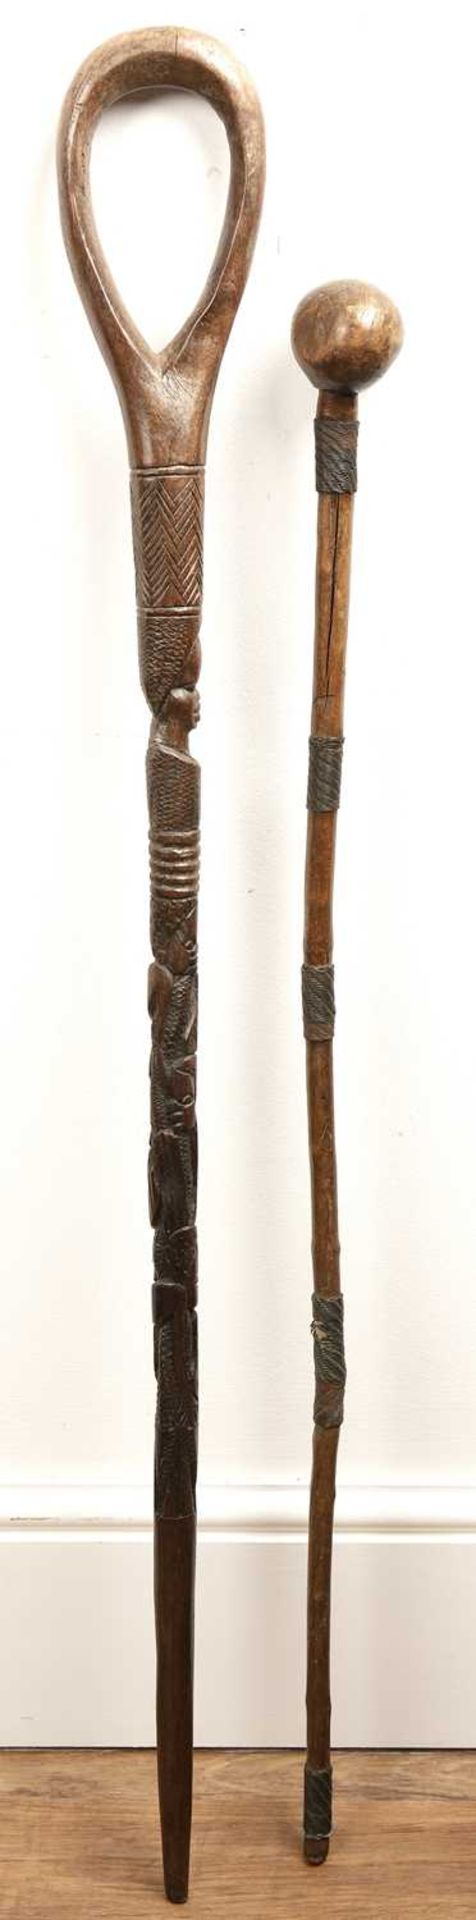 Knob kerry stick African, possibly Zulu, 84cm and another carved stick, 96cm (2)The knob kerry has - Bild 3 aus 3